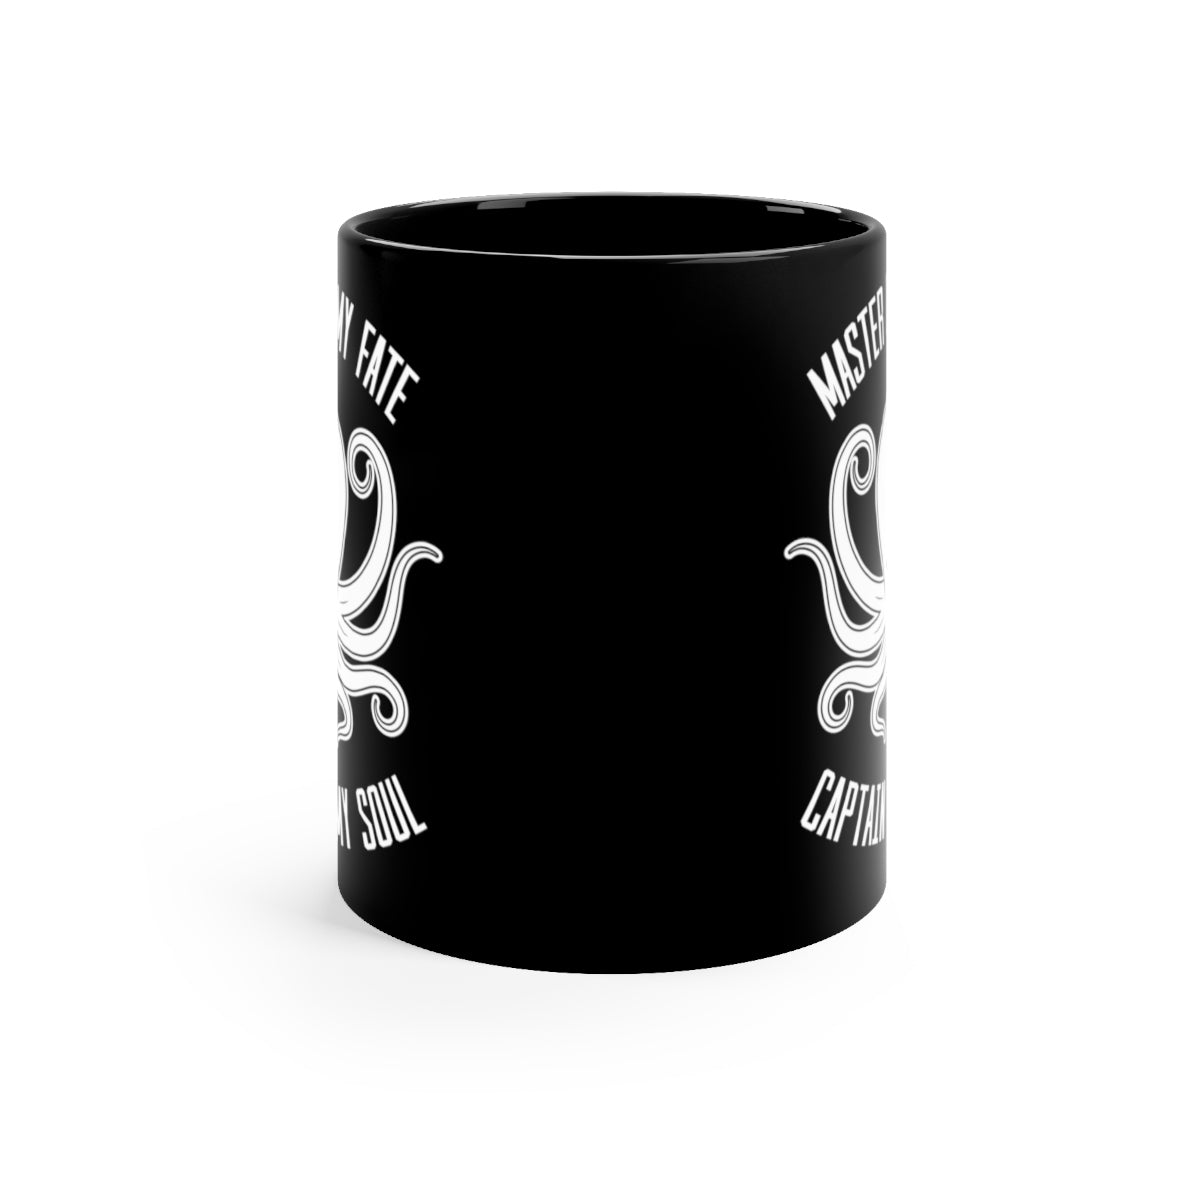 Octopus Black Coffee mug, Master of my Fate Captain of my Soul, Sailing Boss Men Him Gift Unique Novelty Cool Ceramic Starcove Fashion